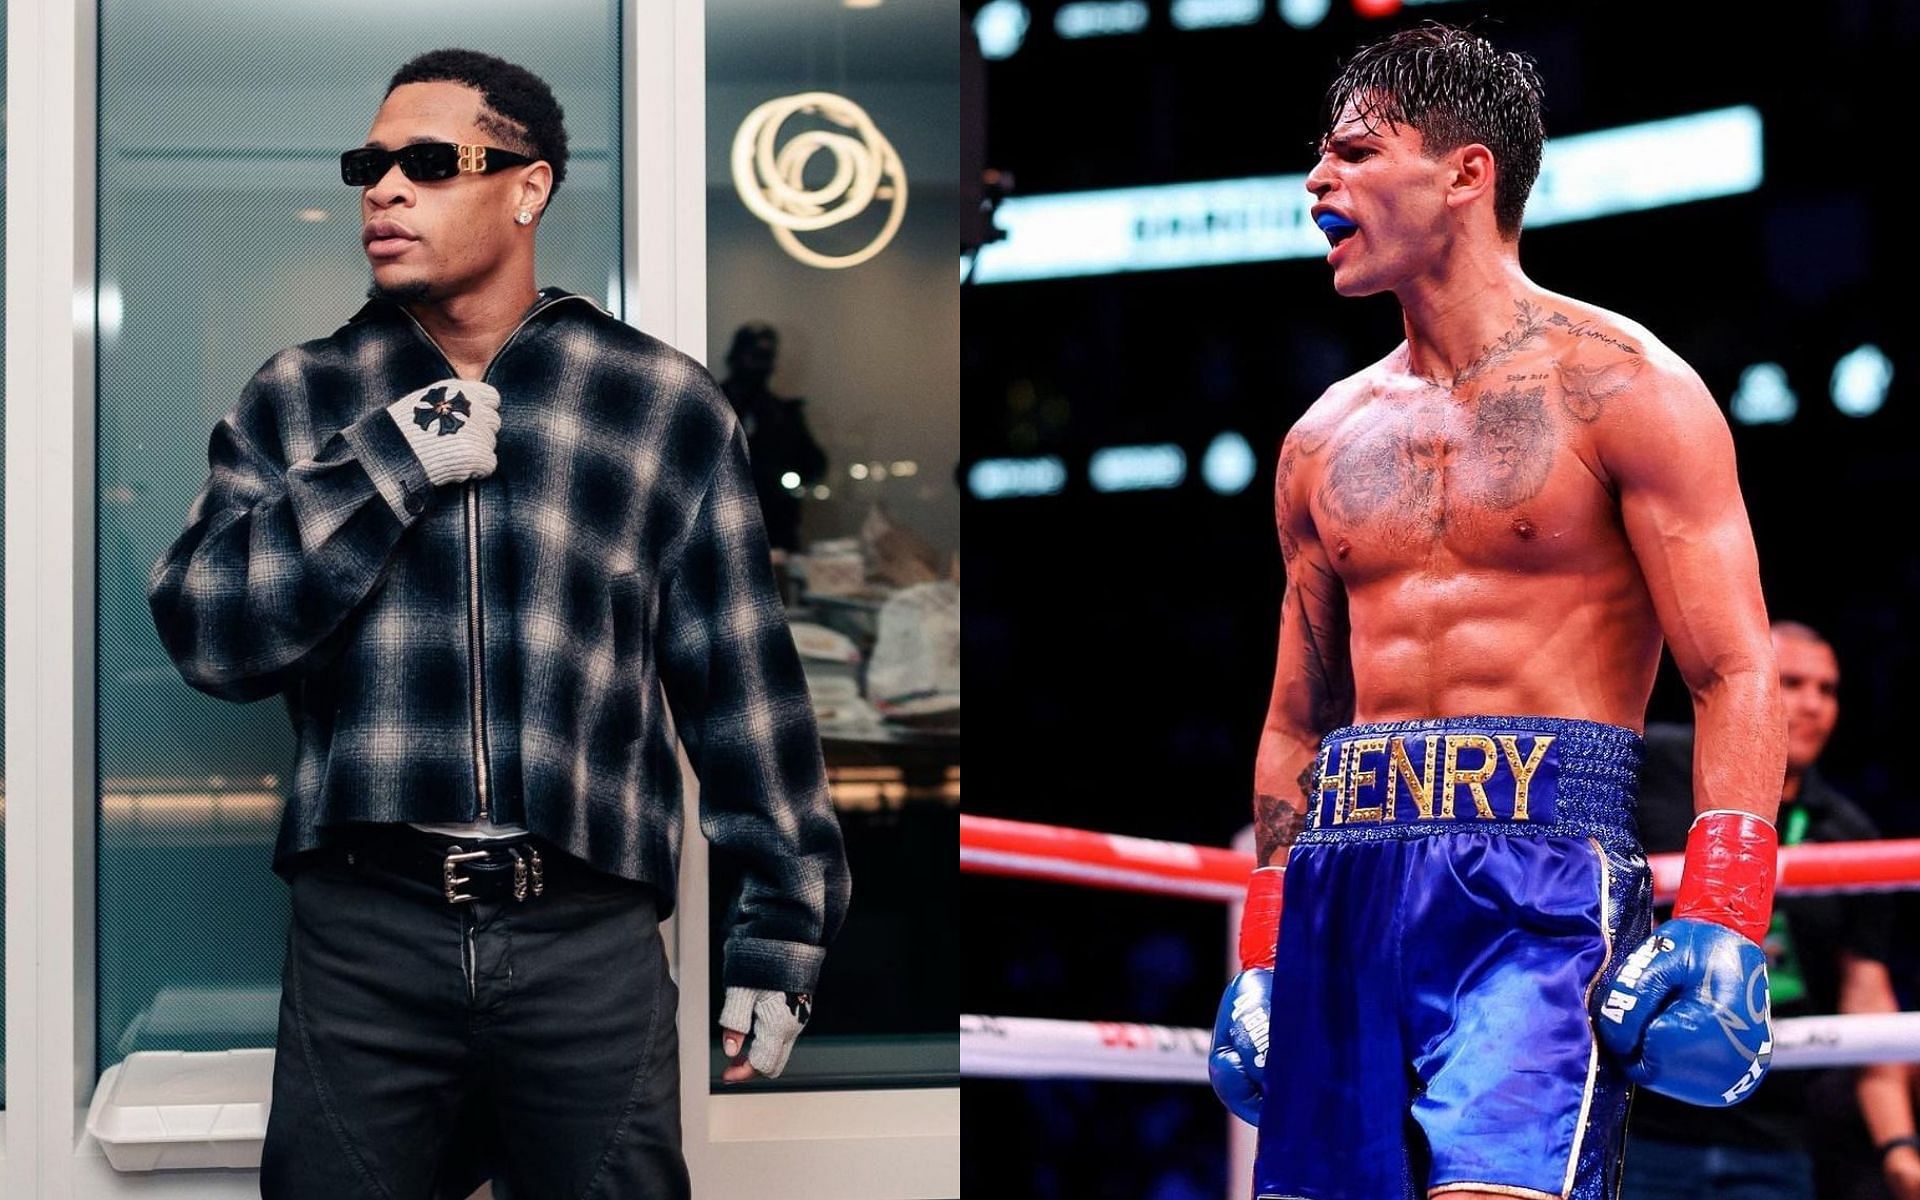 Altercation breaks out a Super Bowl between Devin Haney (left) and Ryan Garcia (right) [Images courtesy @realdevinhaney and @kingryan on Instagram]